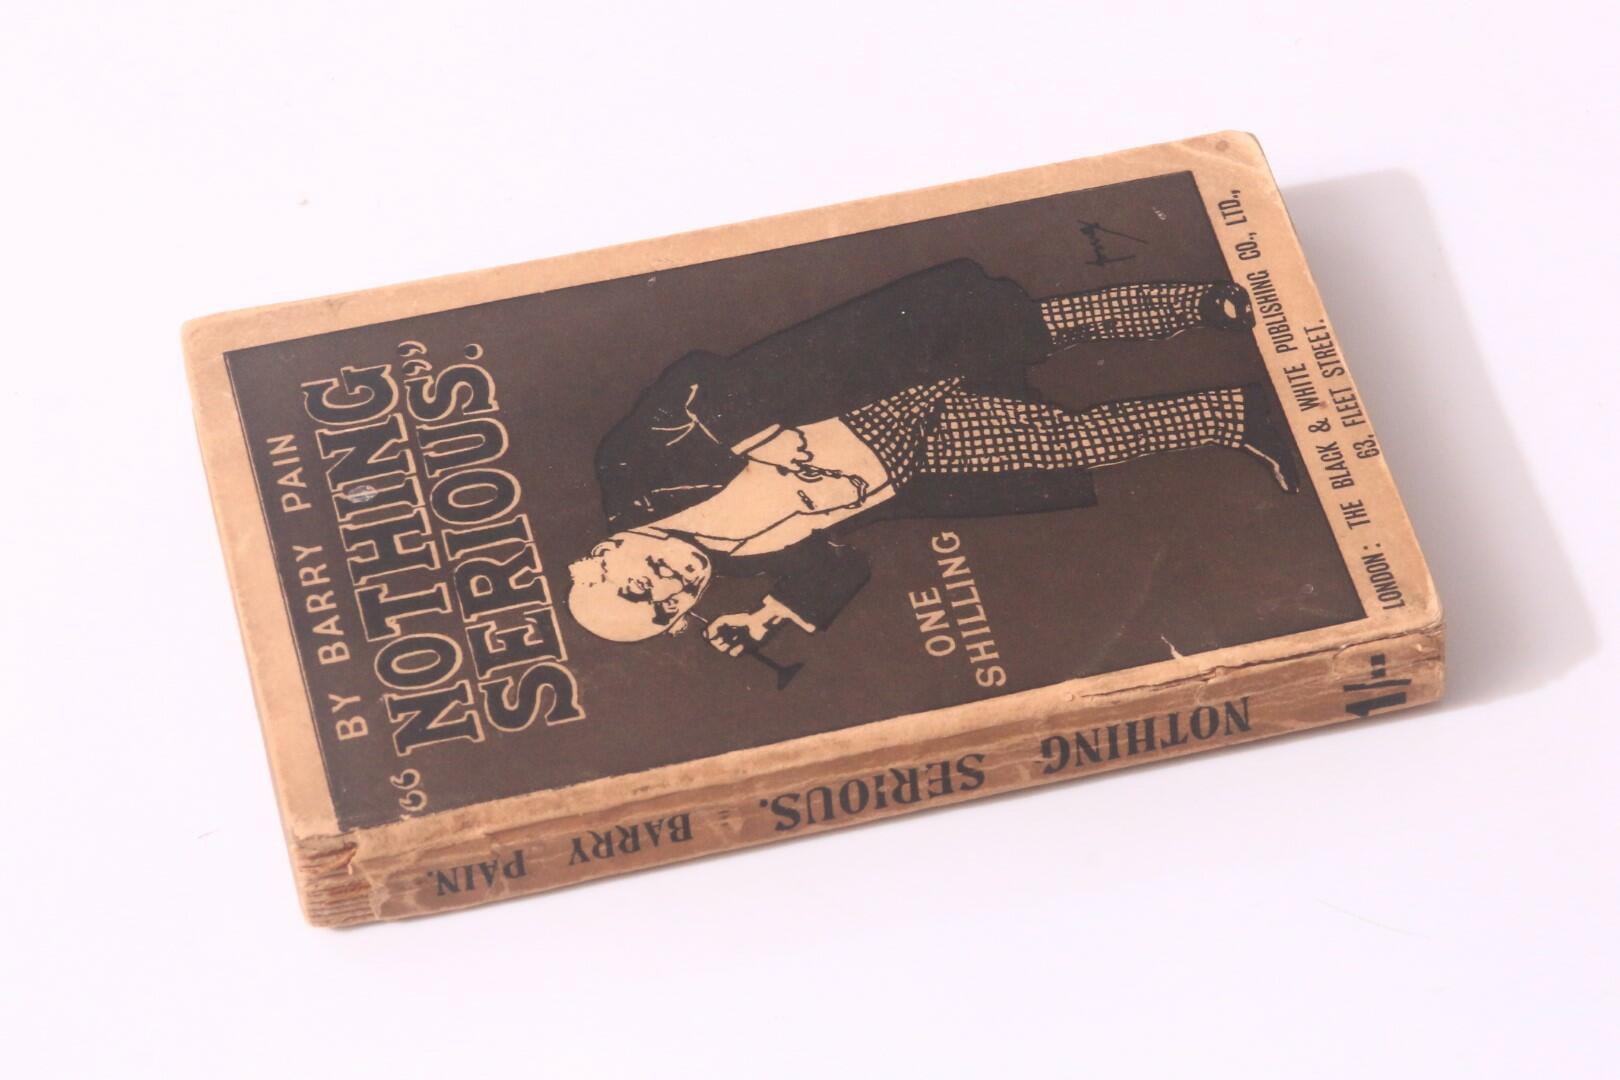 Barry Pain - Nothing Serious - The Black & White Publishing Co., 1901, First Edition.